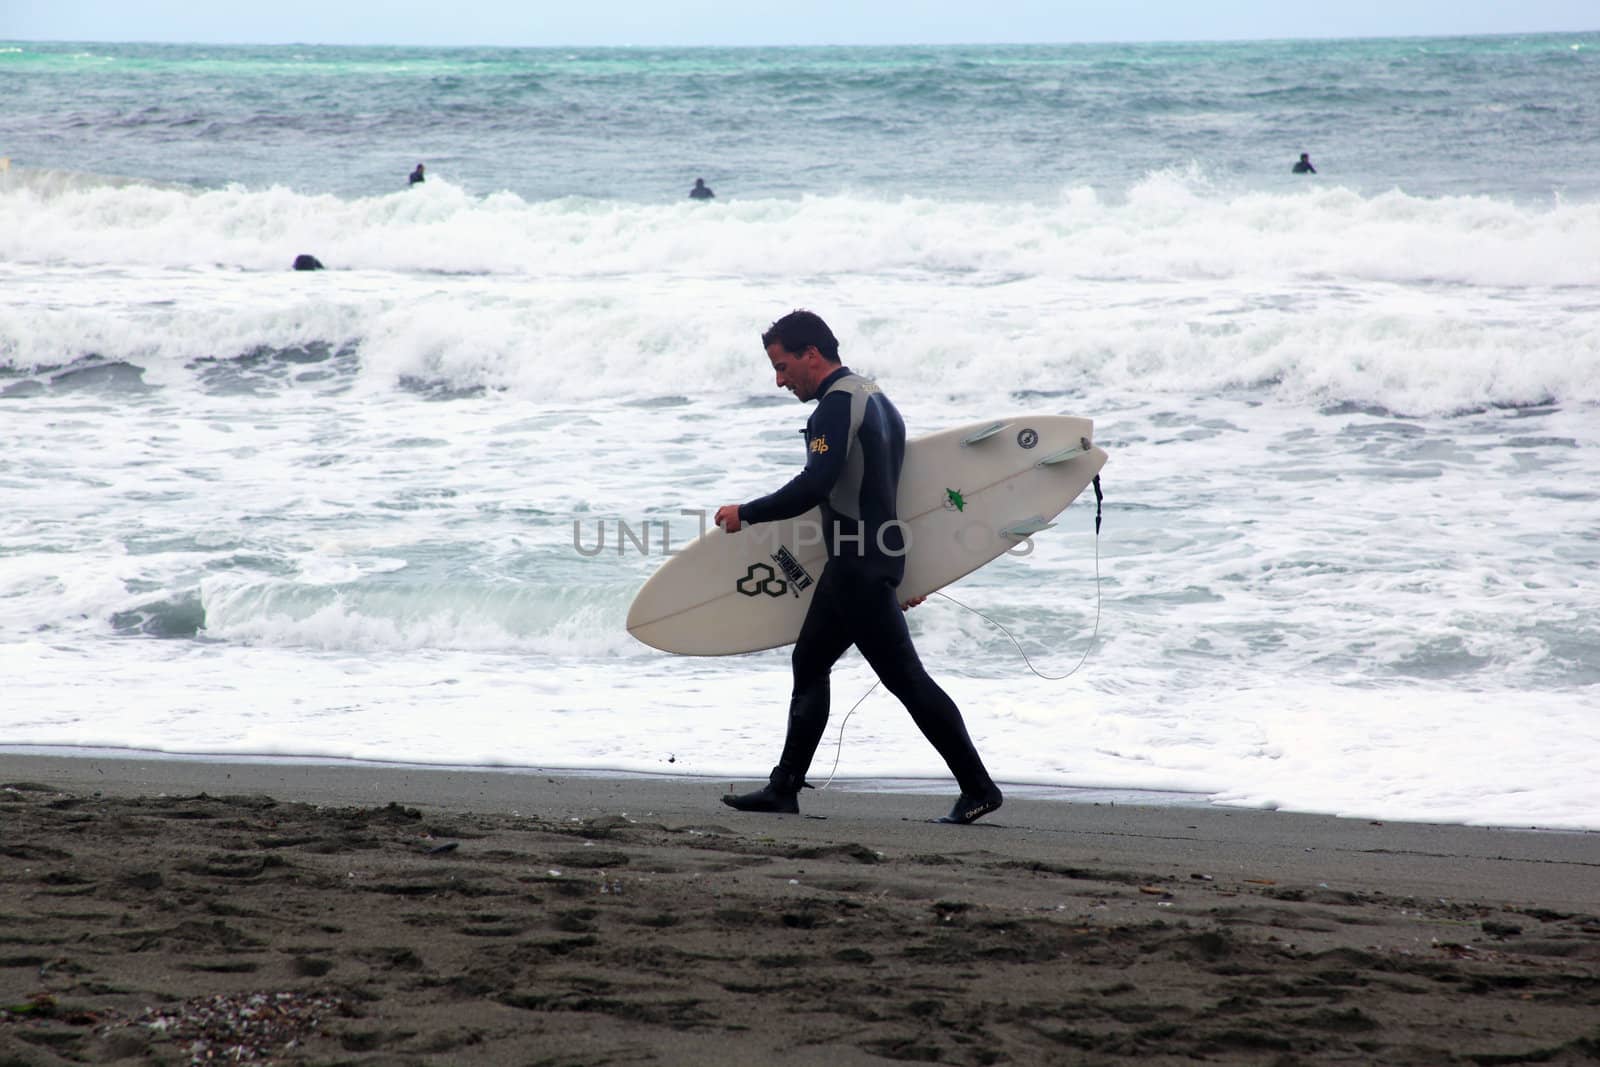 Surfer on the beach in Levanto, Italy